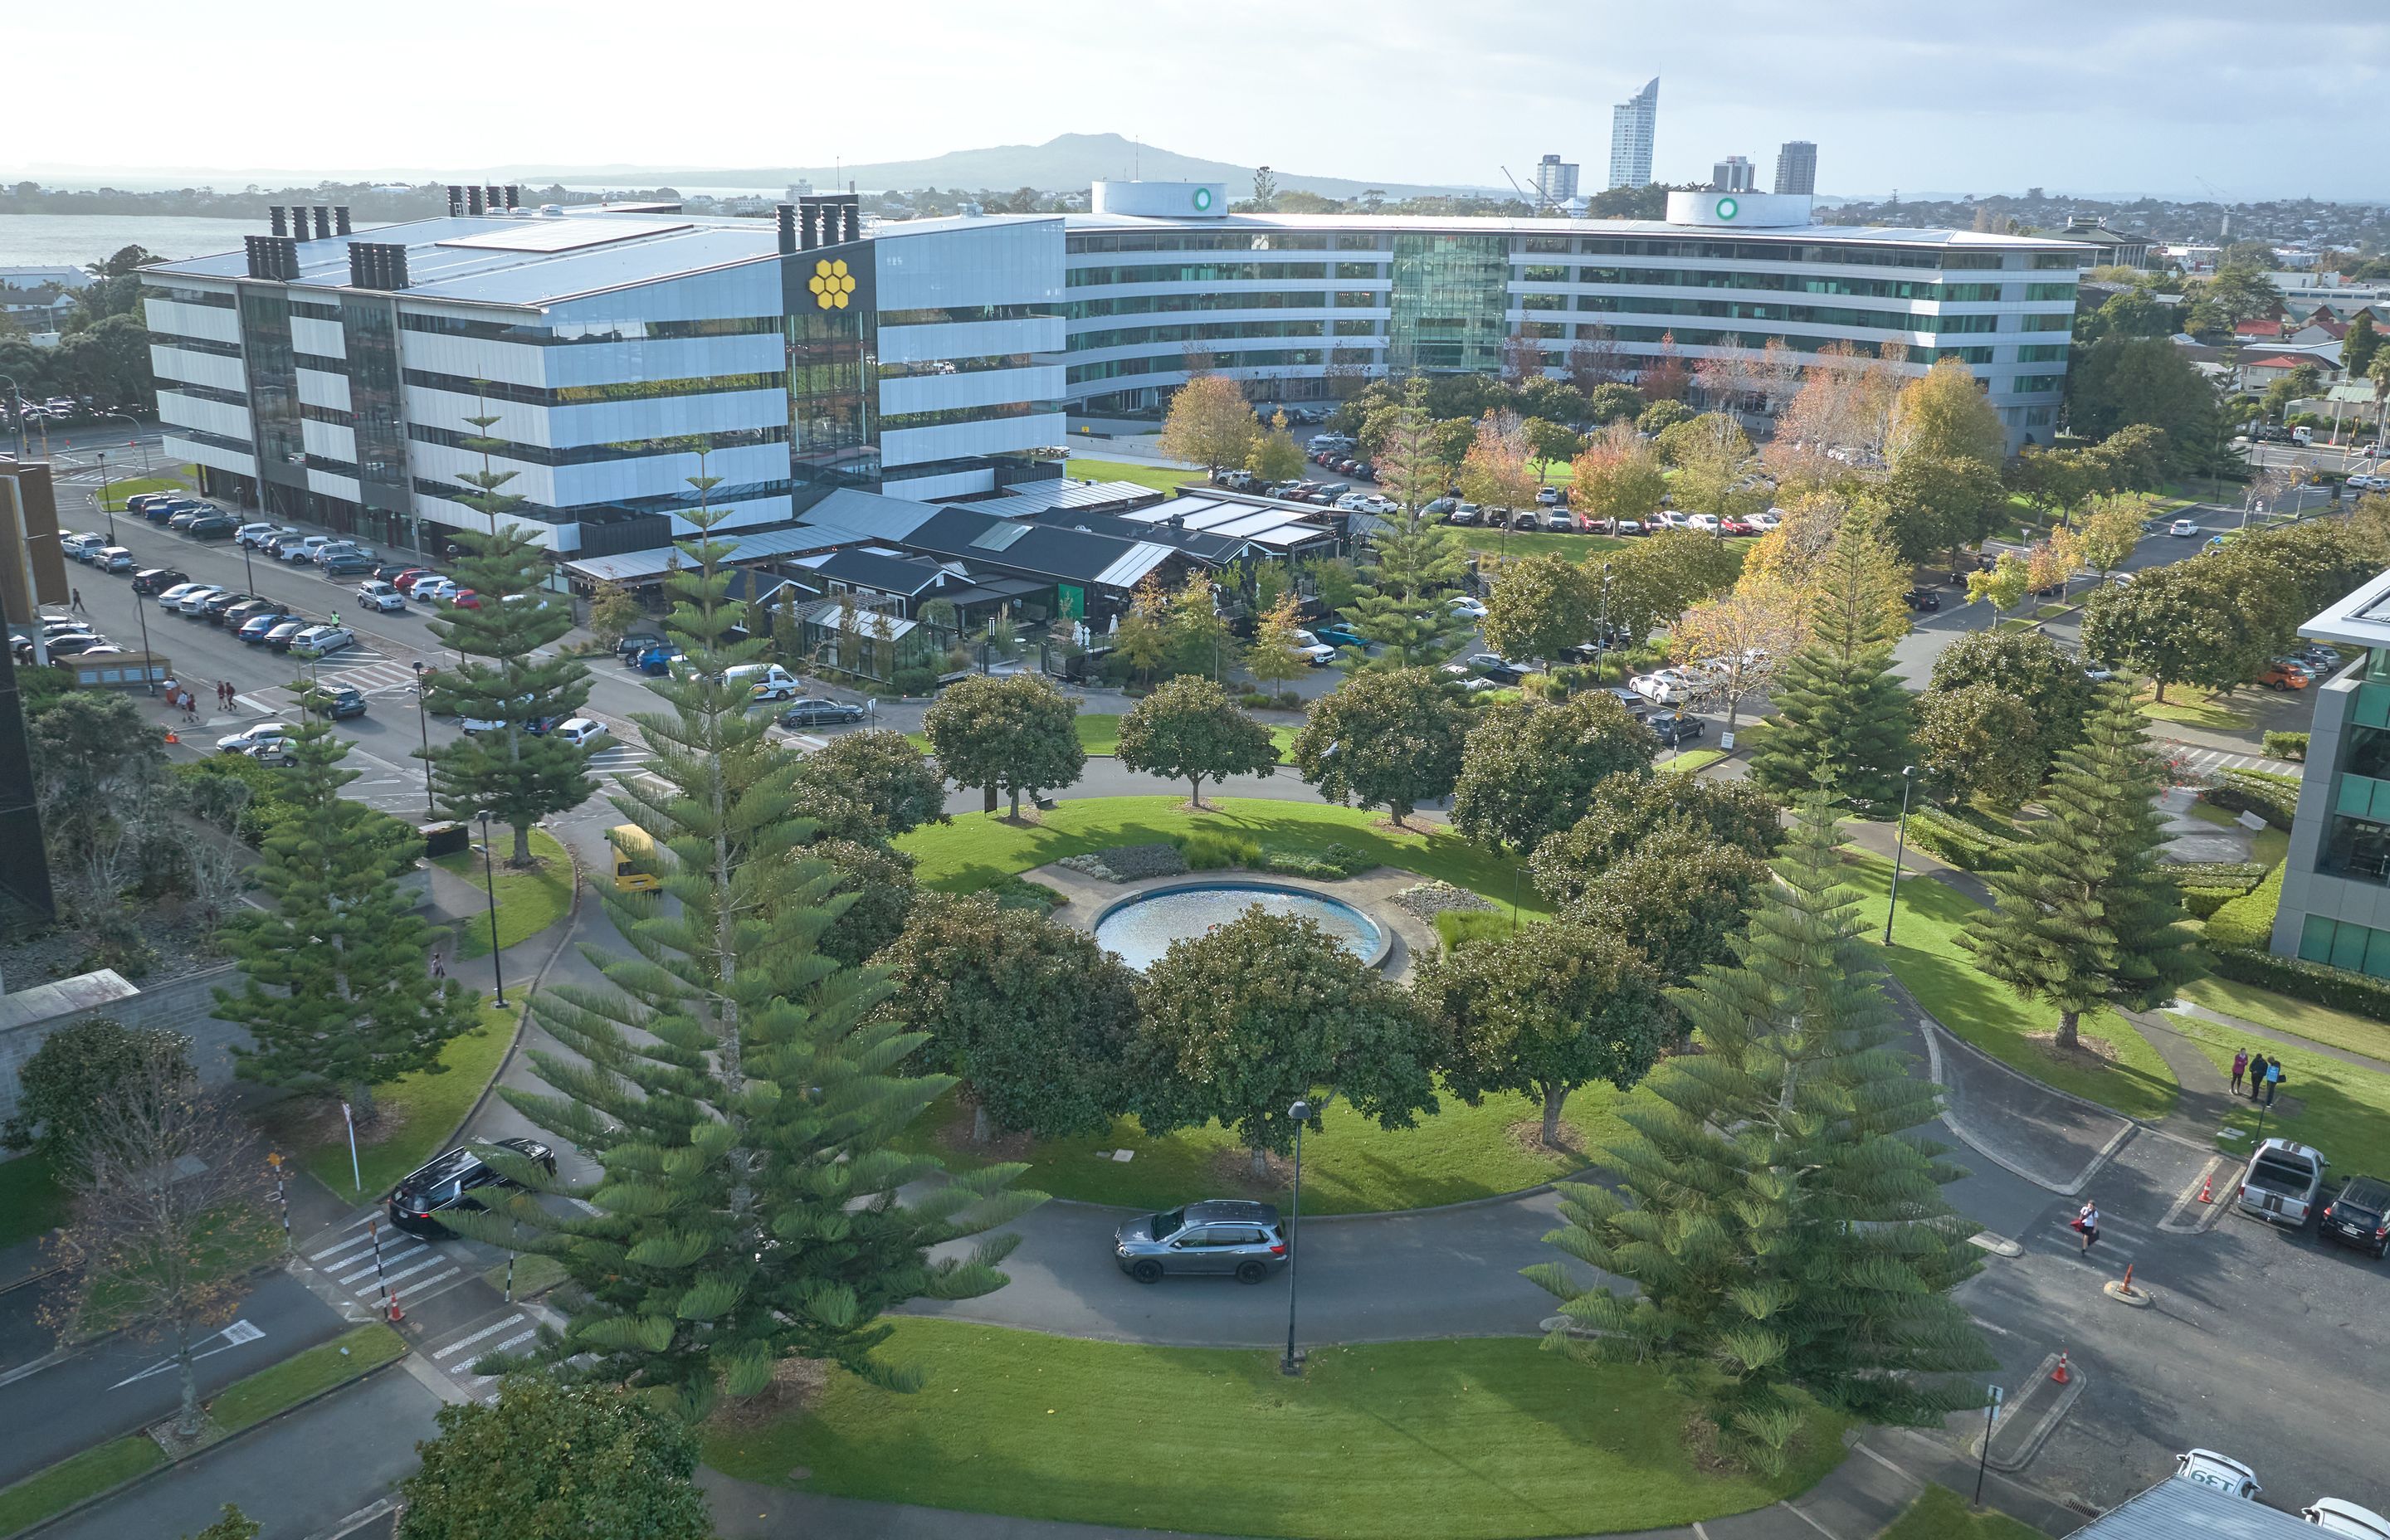 The expansive Smales Farm landscape is maintained by Natural Habitats.